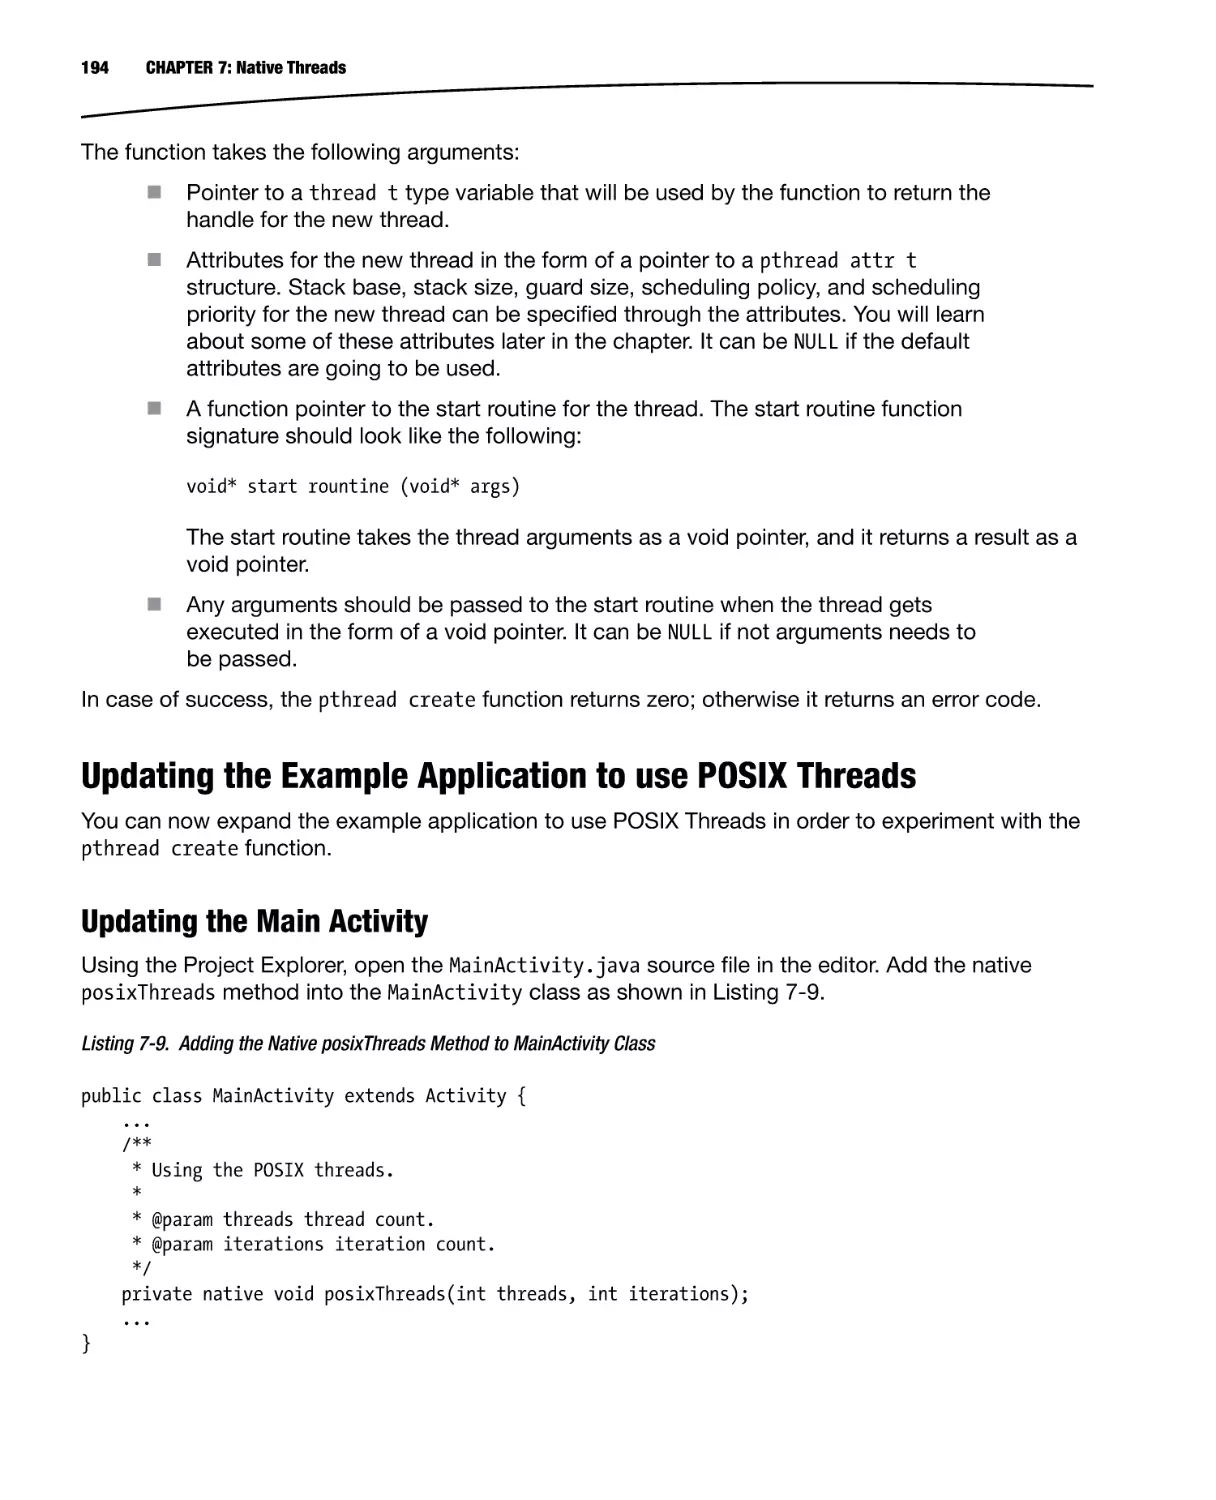 Updating the Example Application to use POSIX Threads
Updating the Main Activity